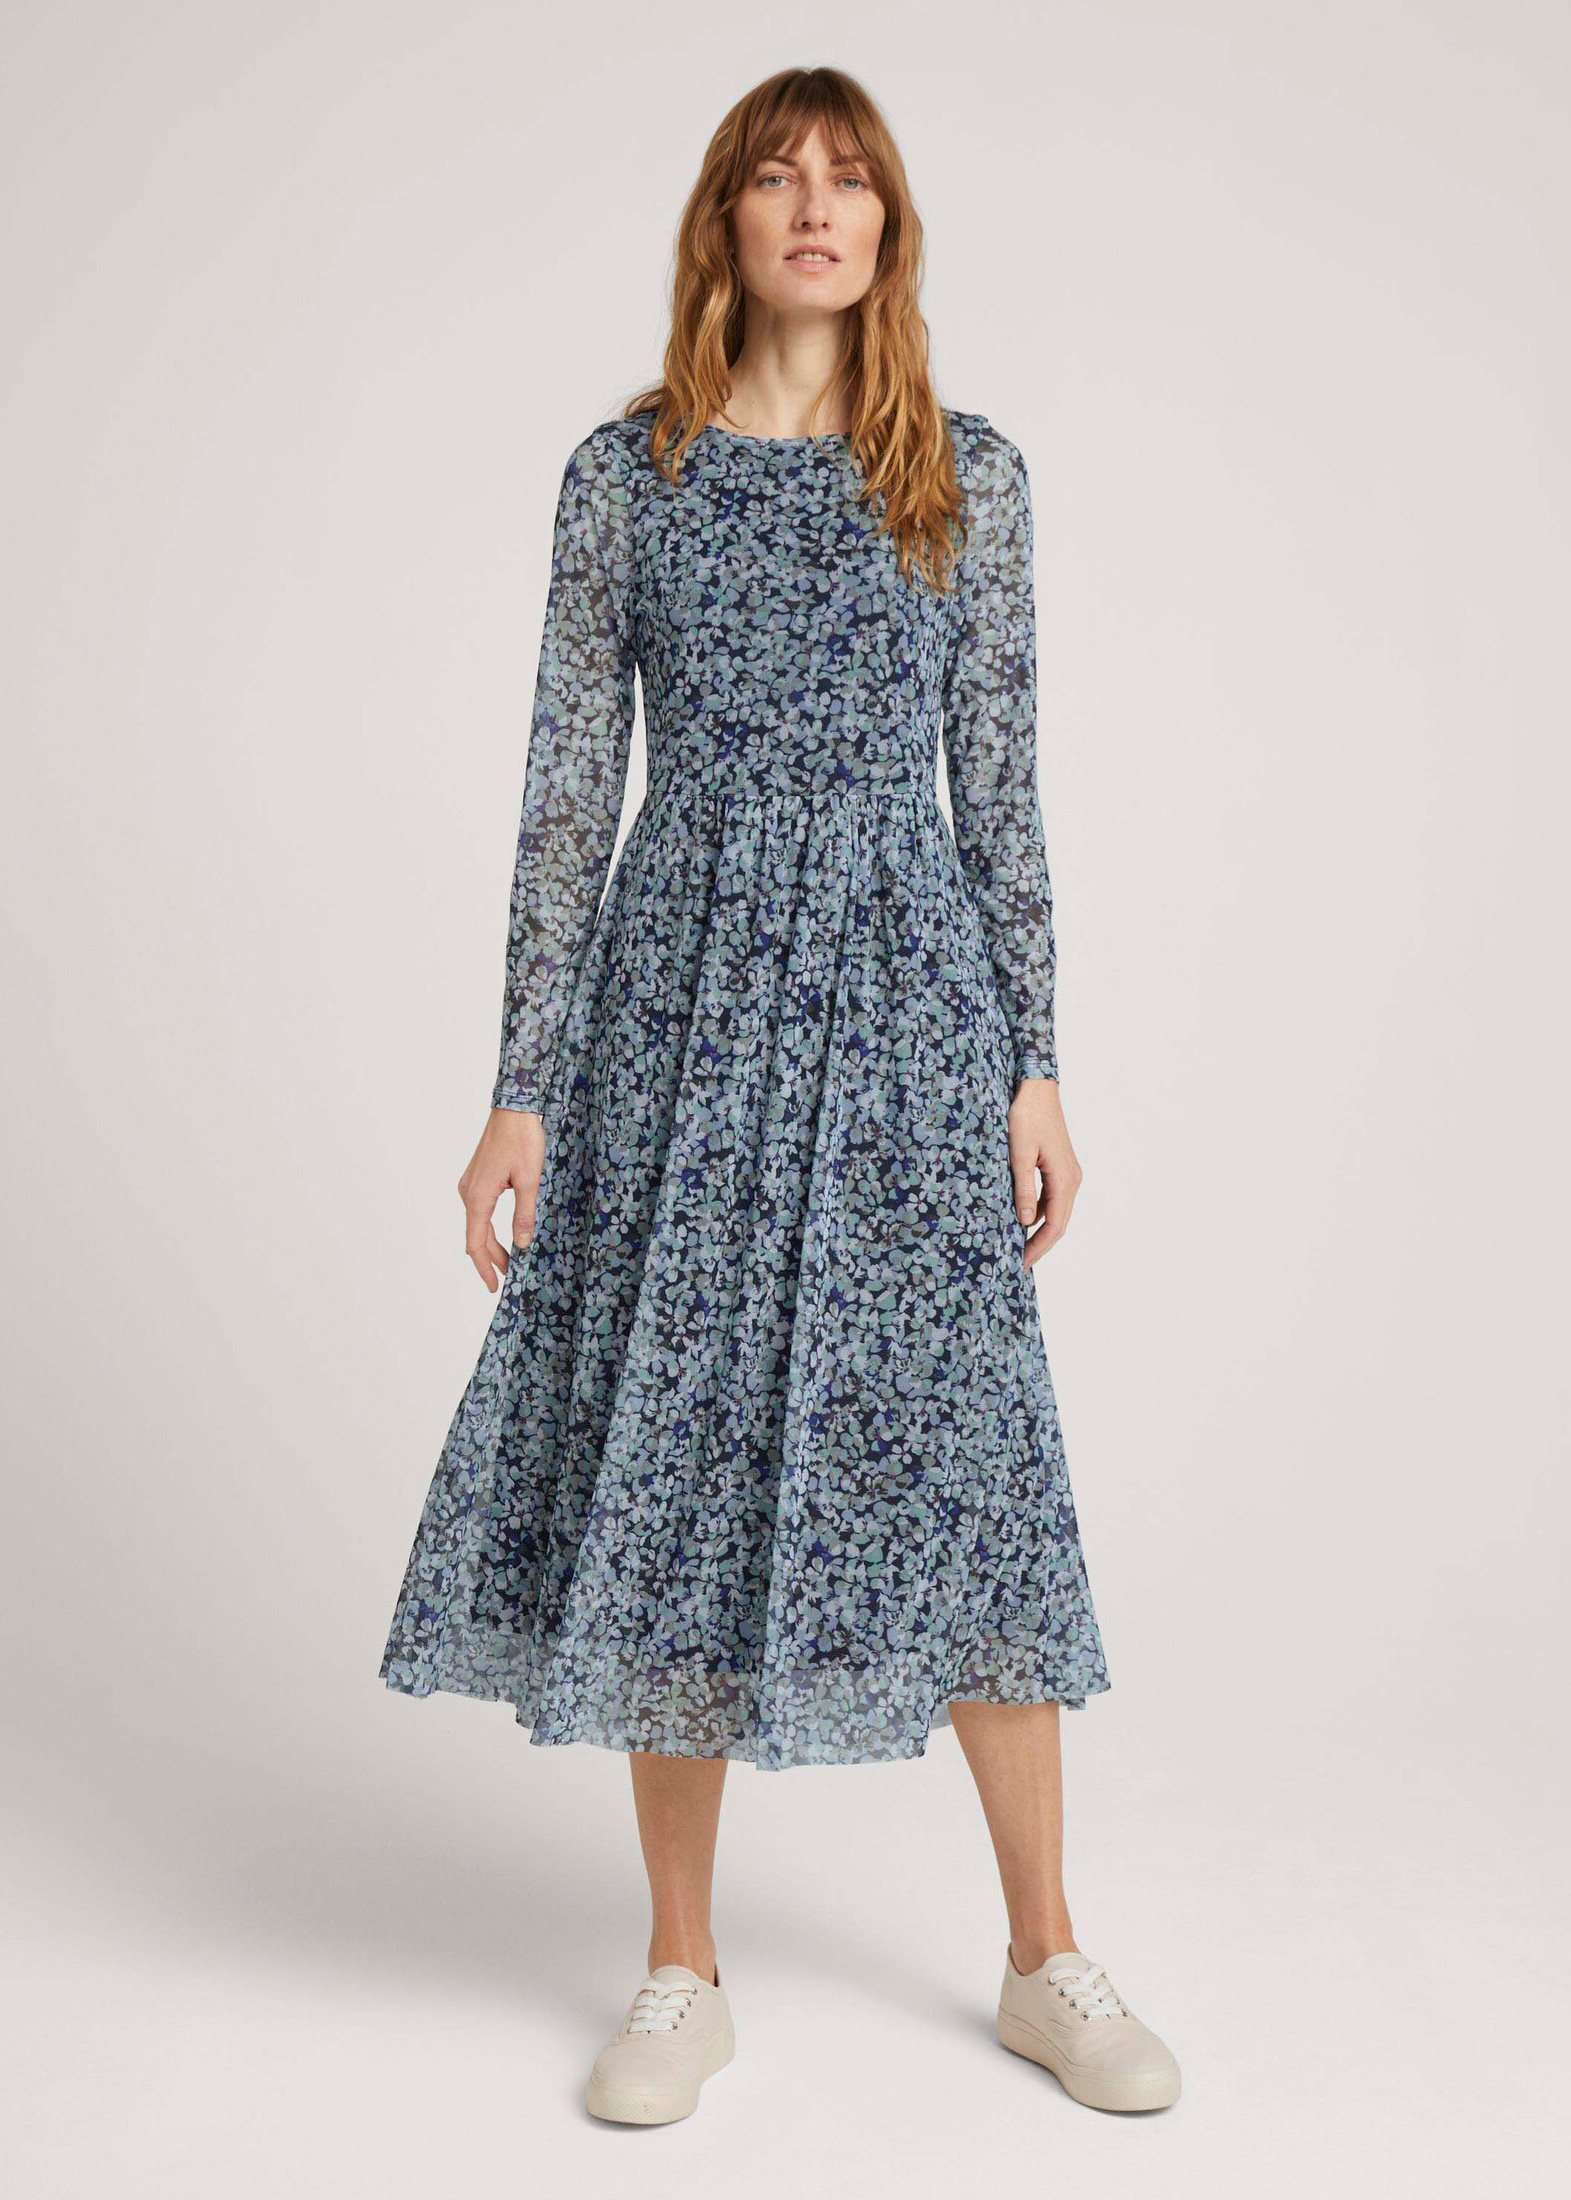 Tom Tailor® Dress Mesh Midi - Navy Floral Design (1023588-27263) is no  longer available:(